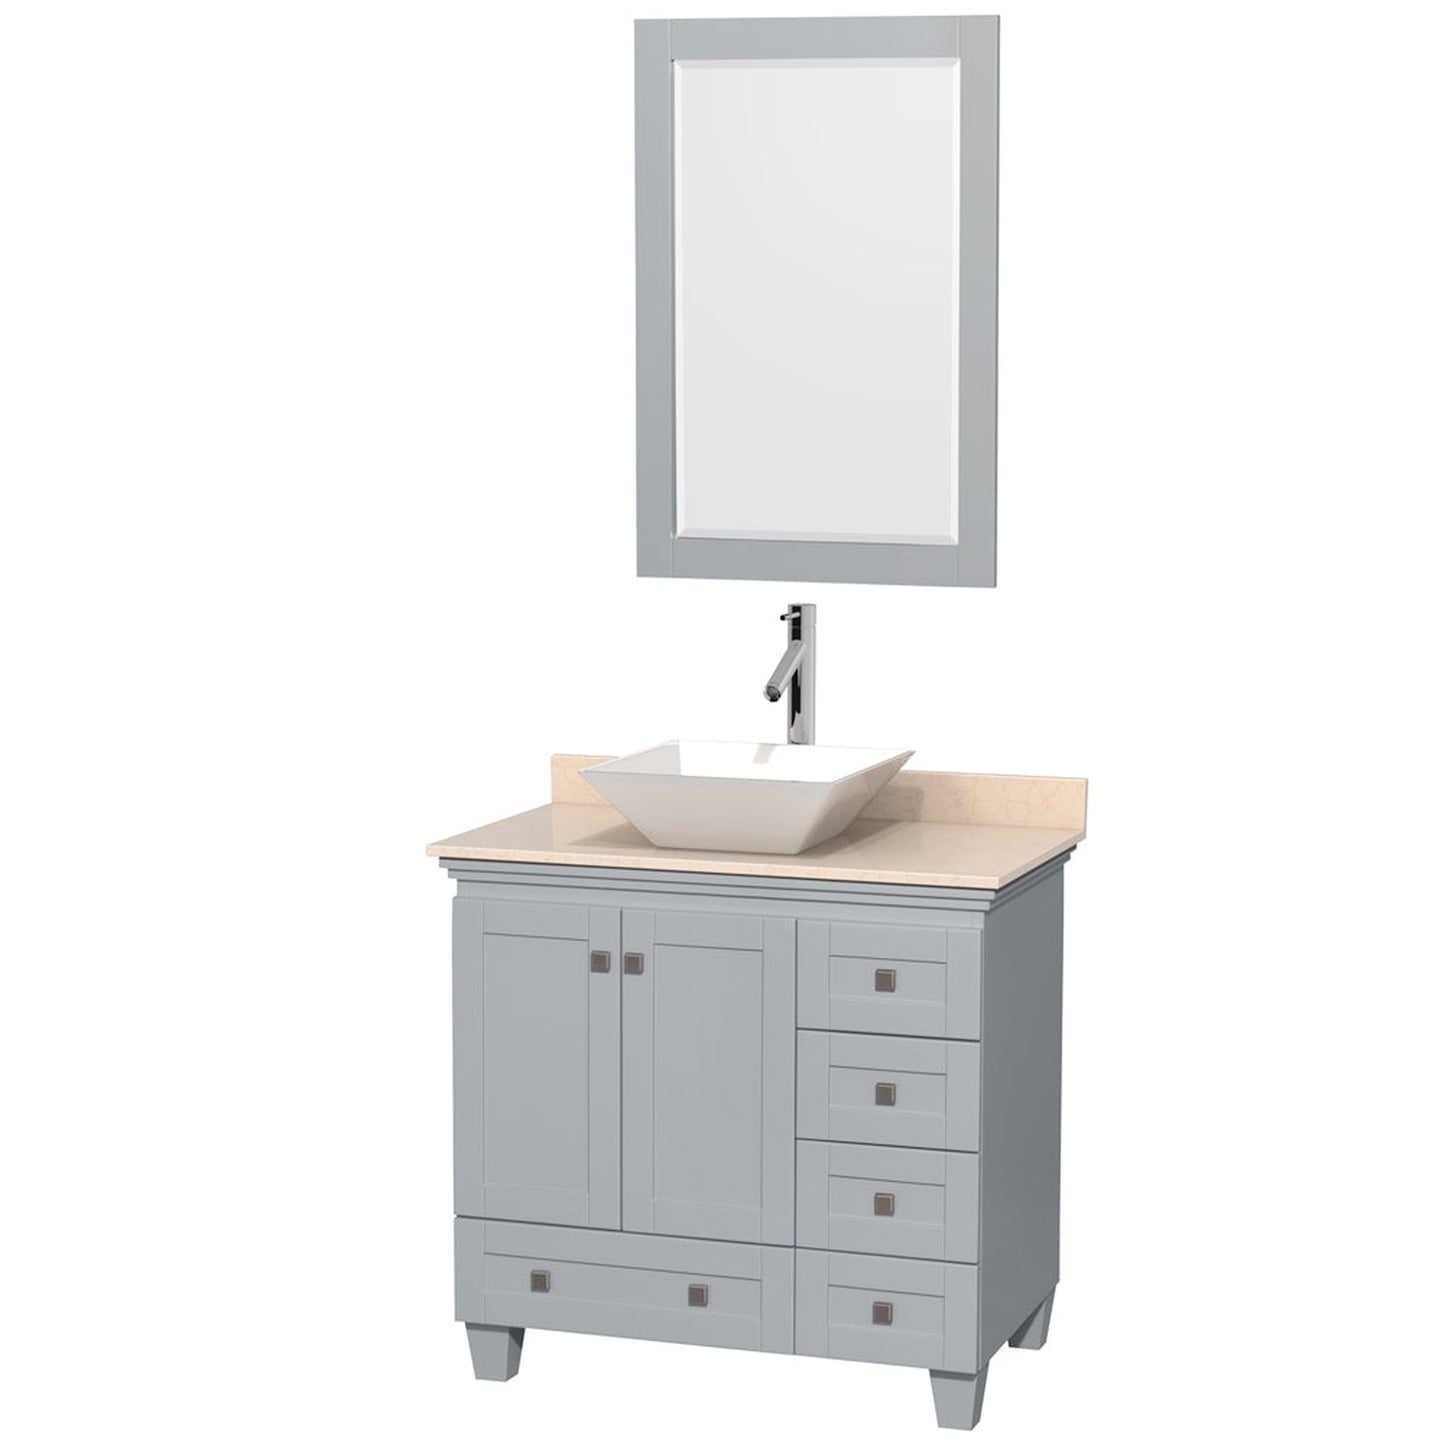 Wyndham Collection Acclaim 36" Single Bathroom Vanity in Oyster Gray With Ivory Marble Countertop, Pyra White Porcelain Sink & 24" Mirror